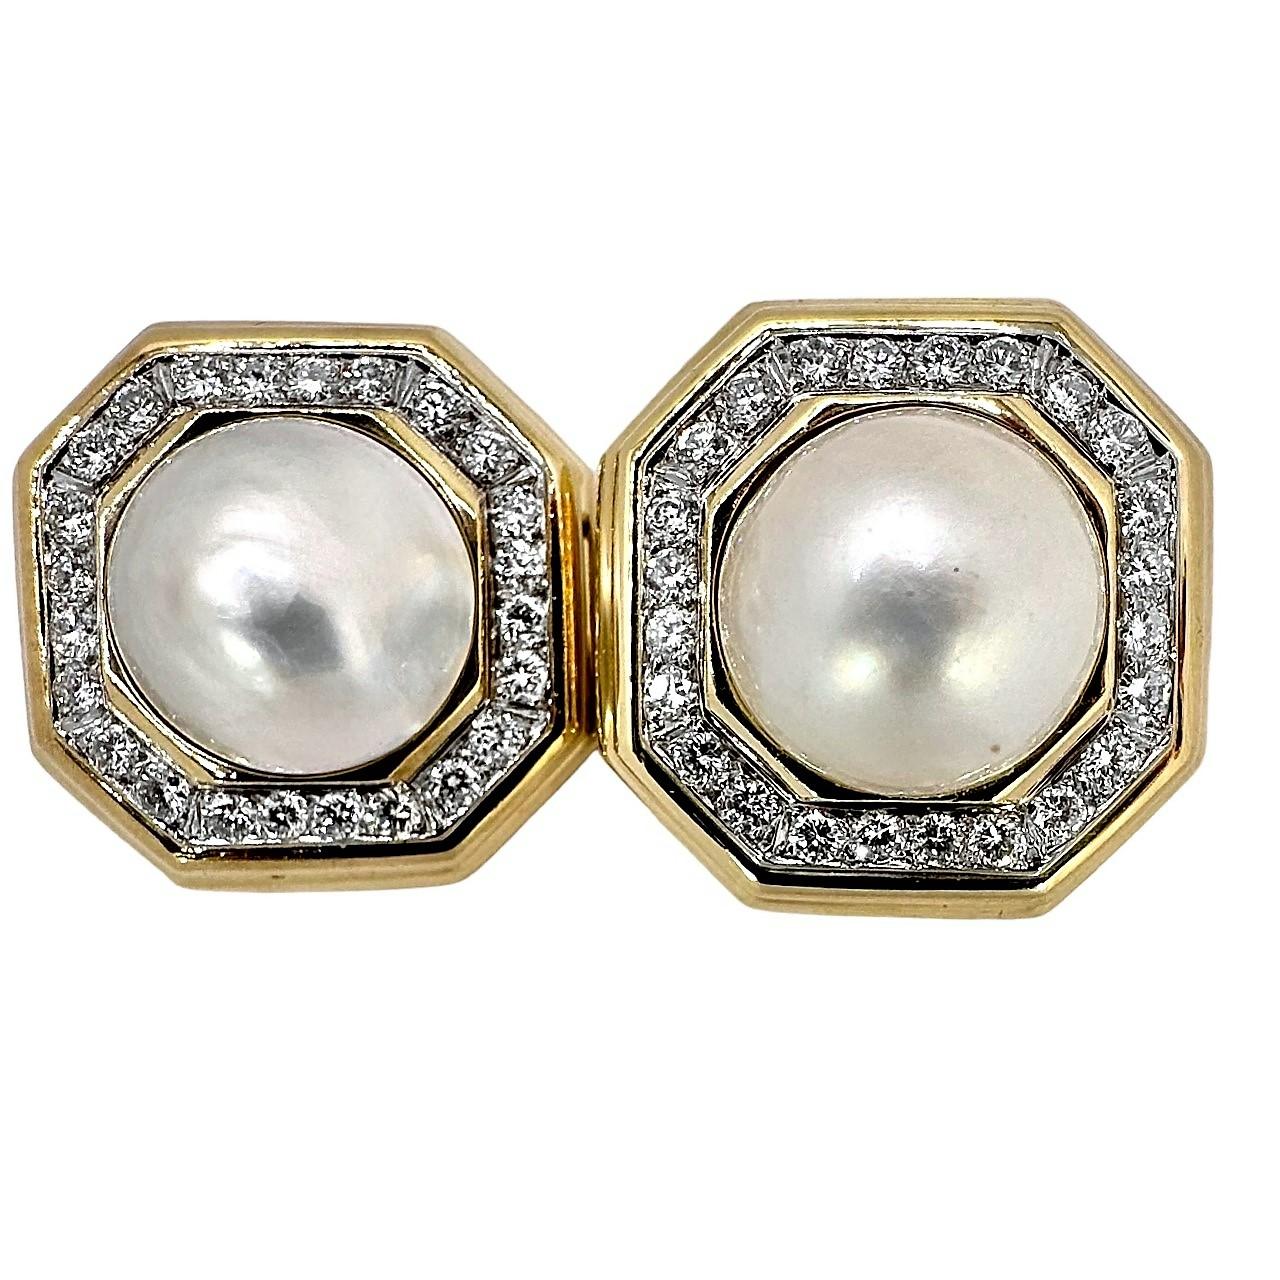 This very impressive pair of 18k yellow gold and platinum earrings were created by French designer 